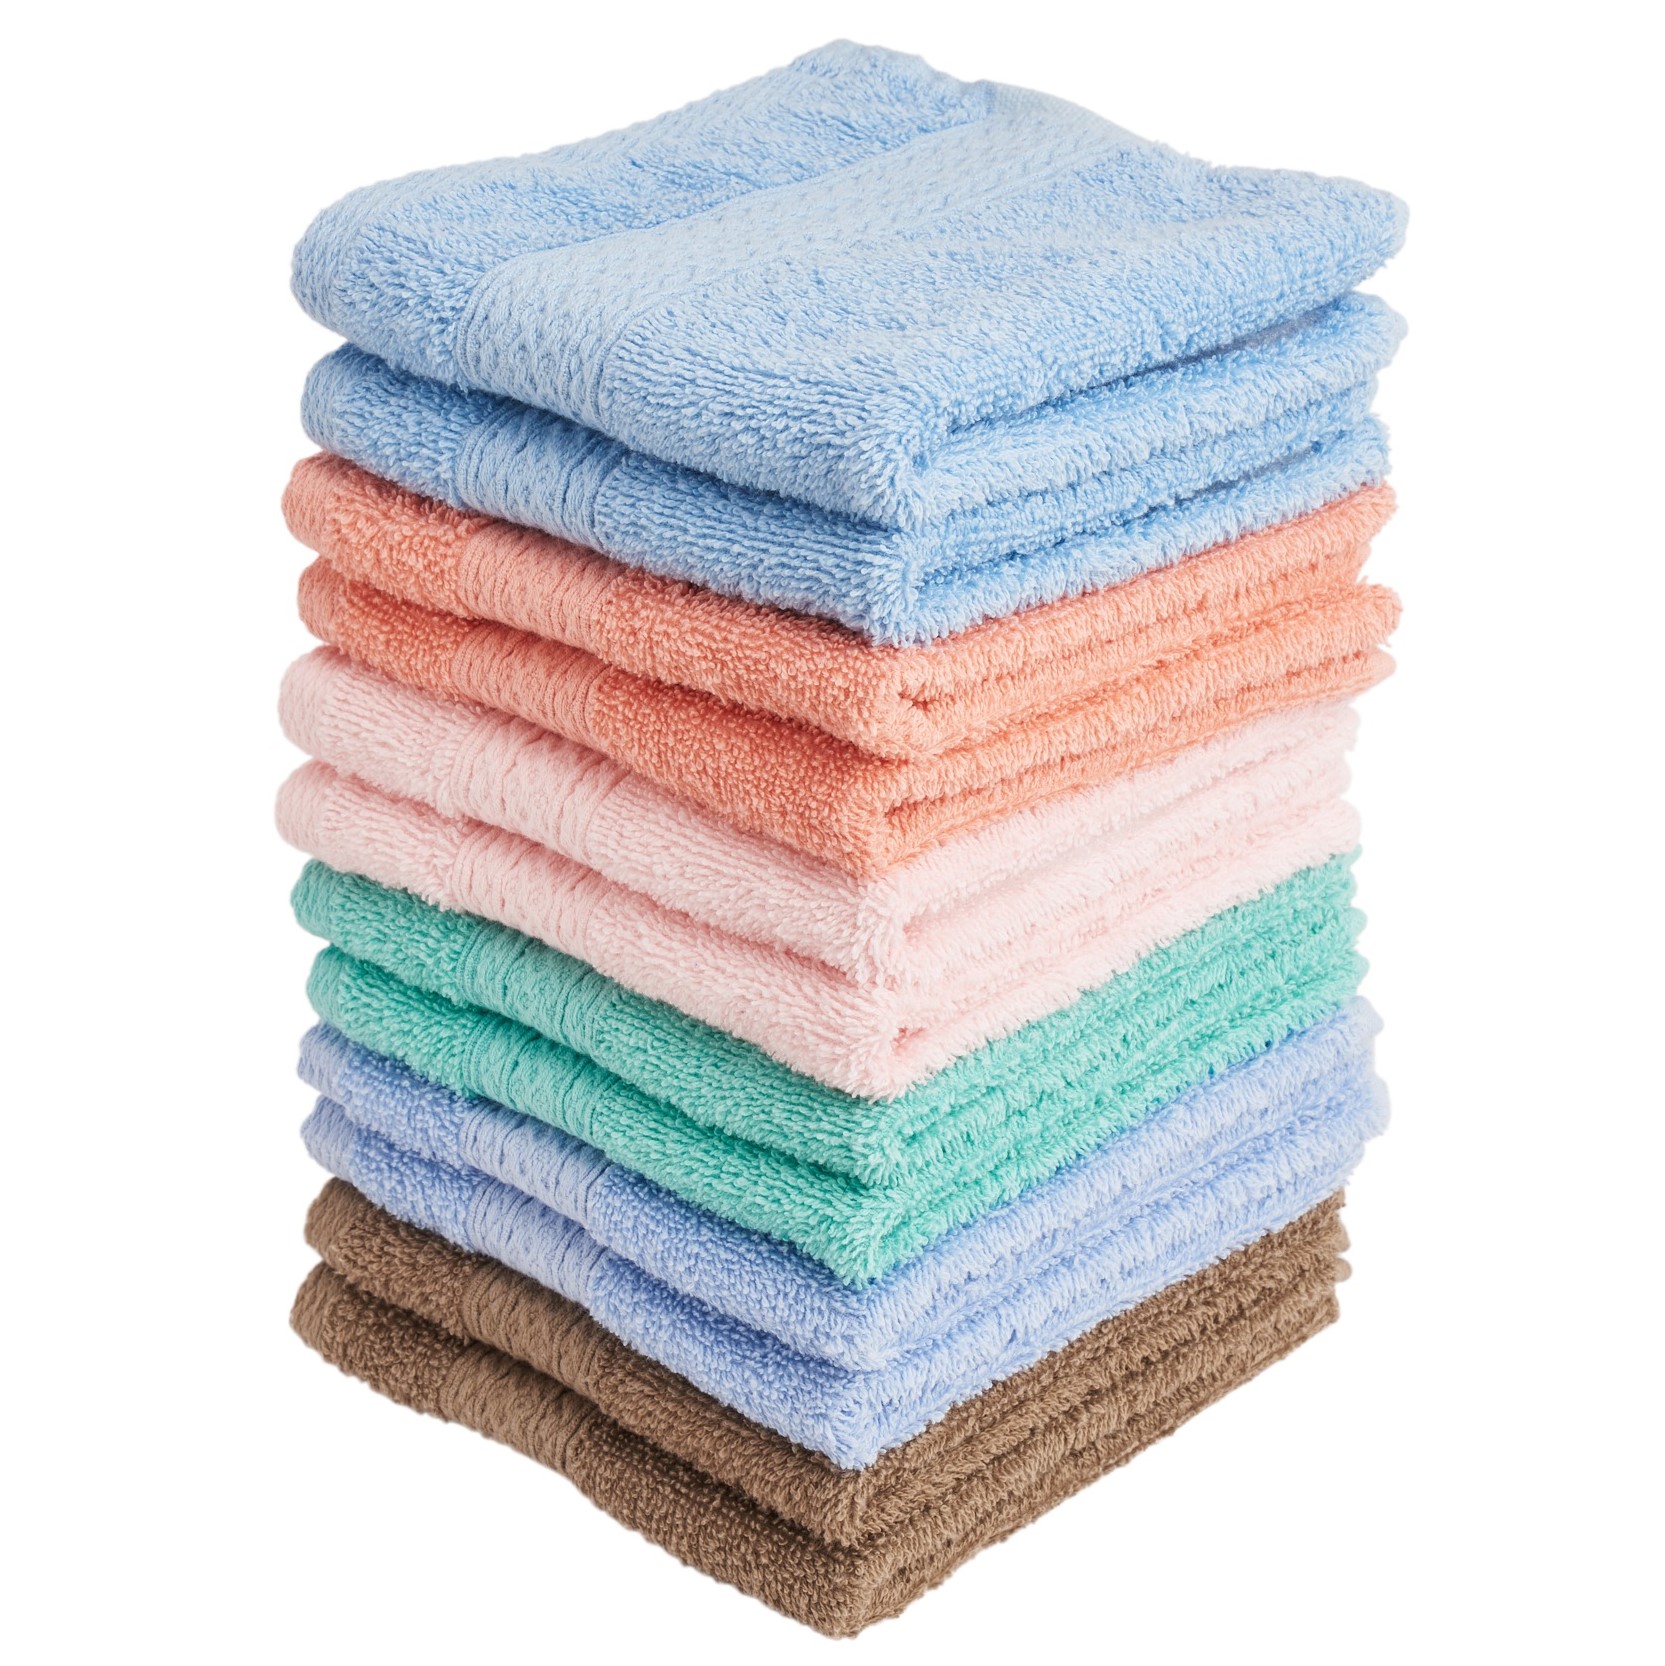 CH 100% Cotton Face Washcloths Set - Ultra Soft Towels for Bathroom and  Home, High Durability and Absorbency, Convenient and Stylish Wash Cloths 